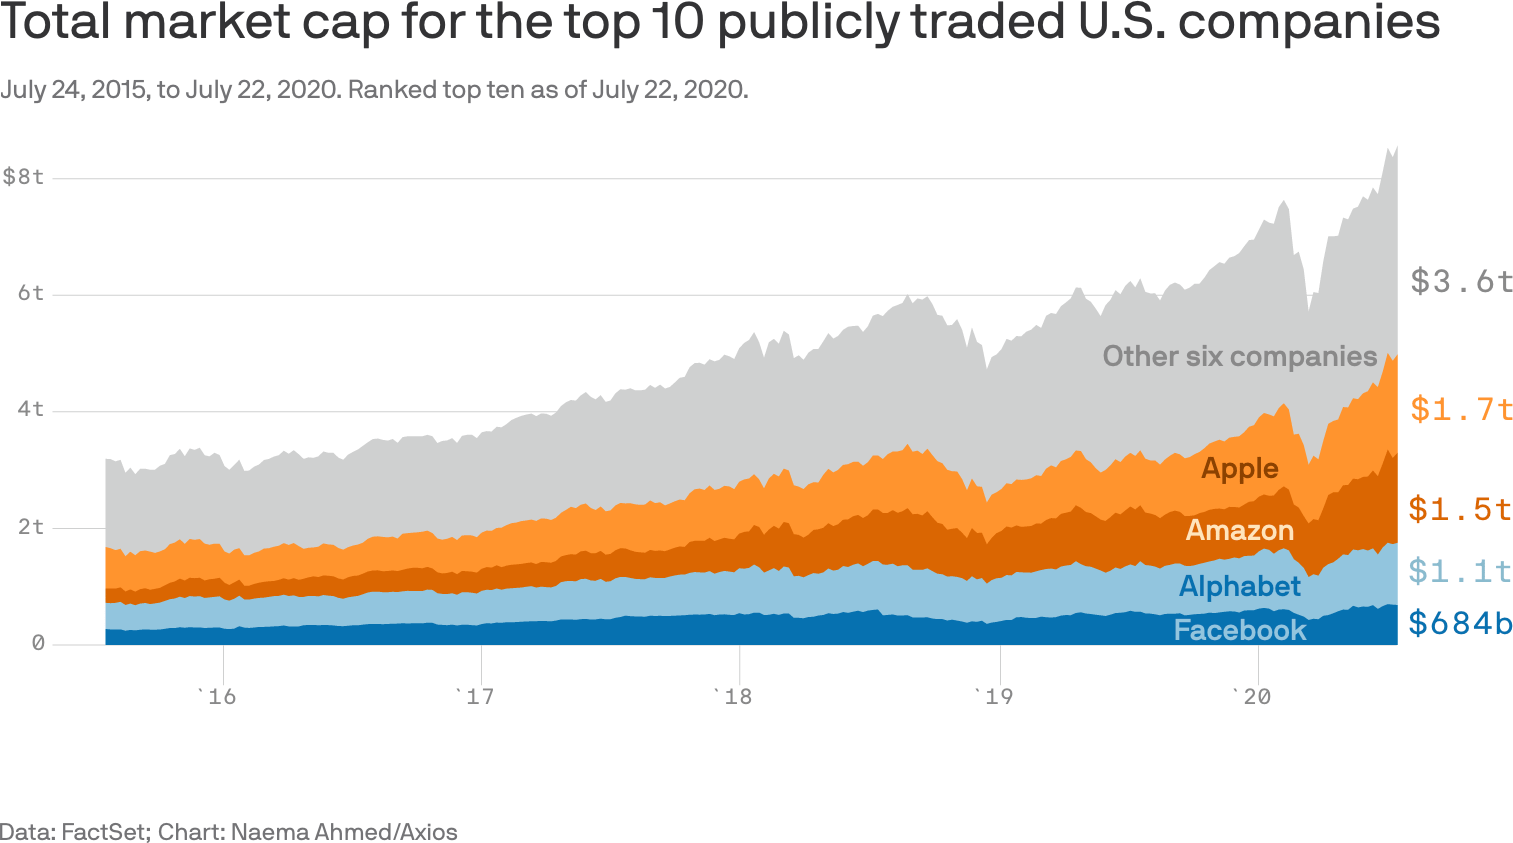 Total market cap for the top 10 publicly traded U.S. companies